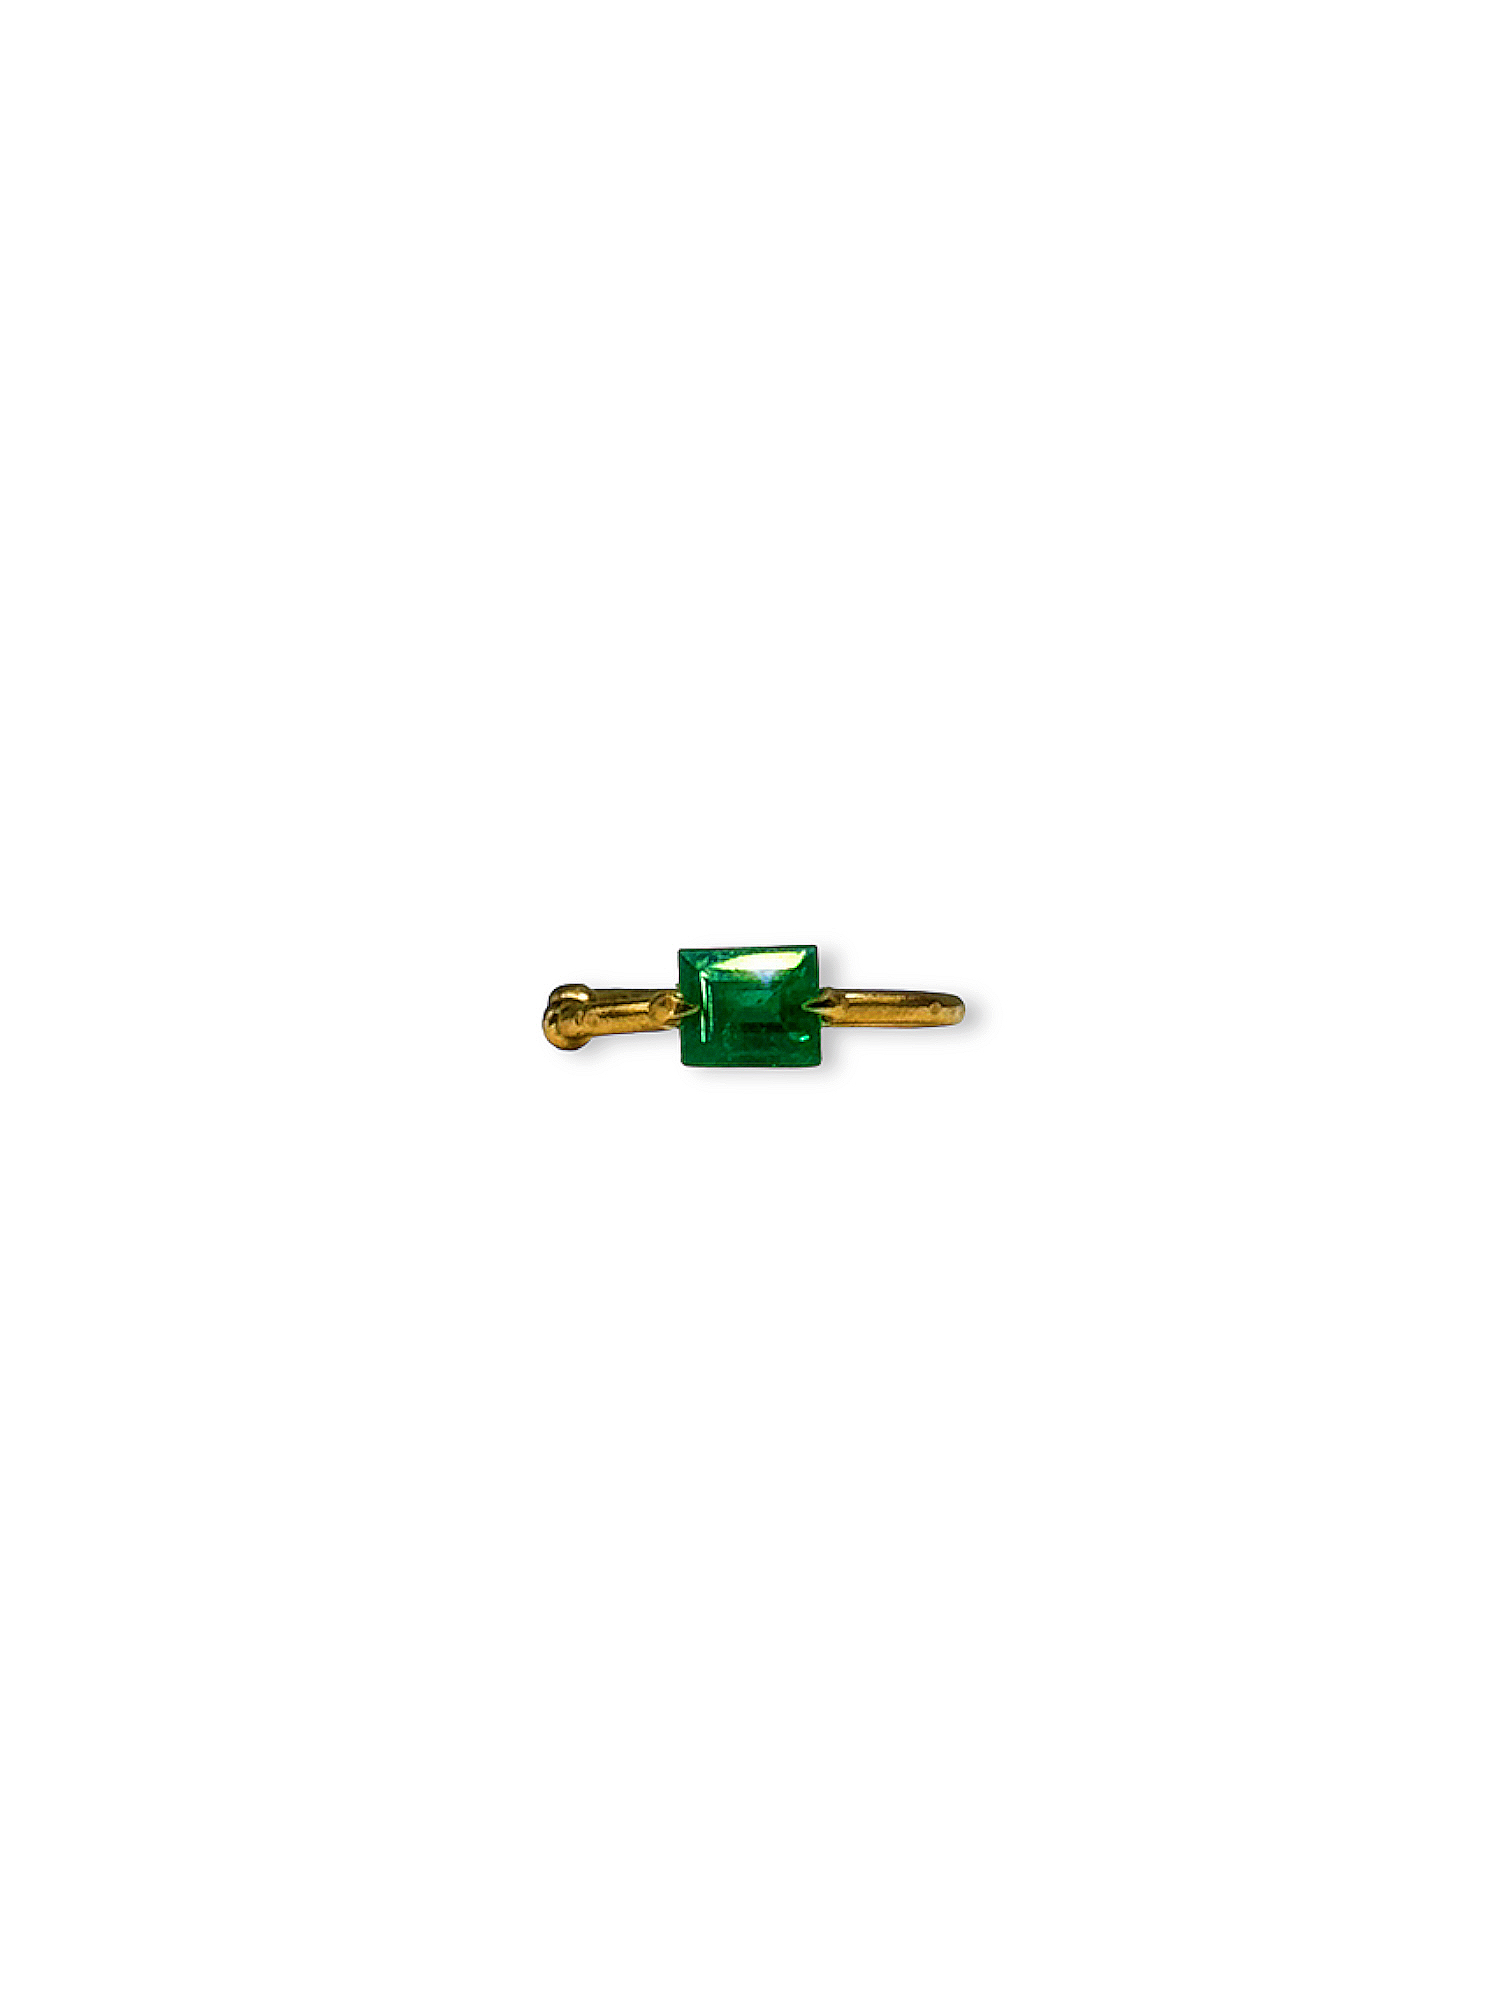 Yellow gold ring adorned with an emerald surrounded by diamonds – Castafiore